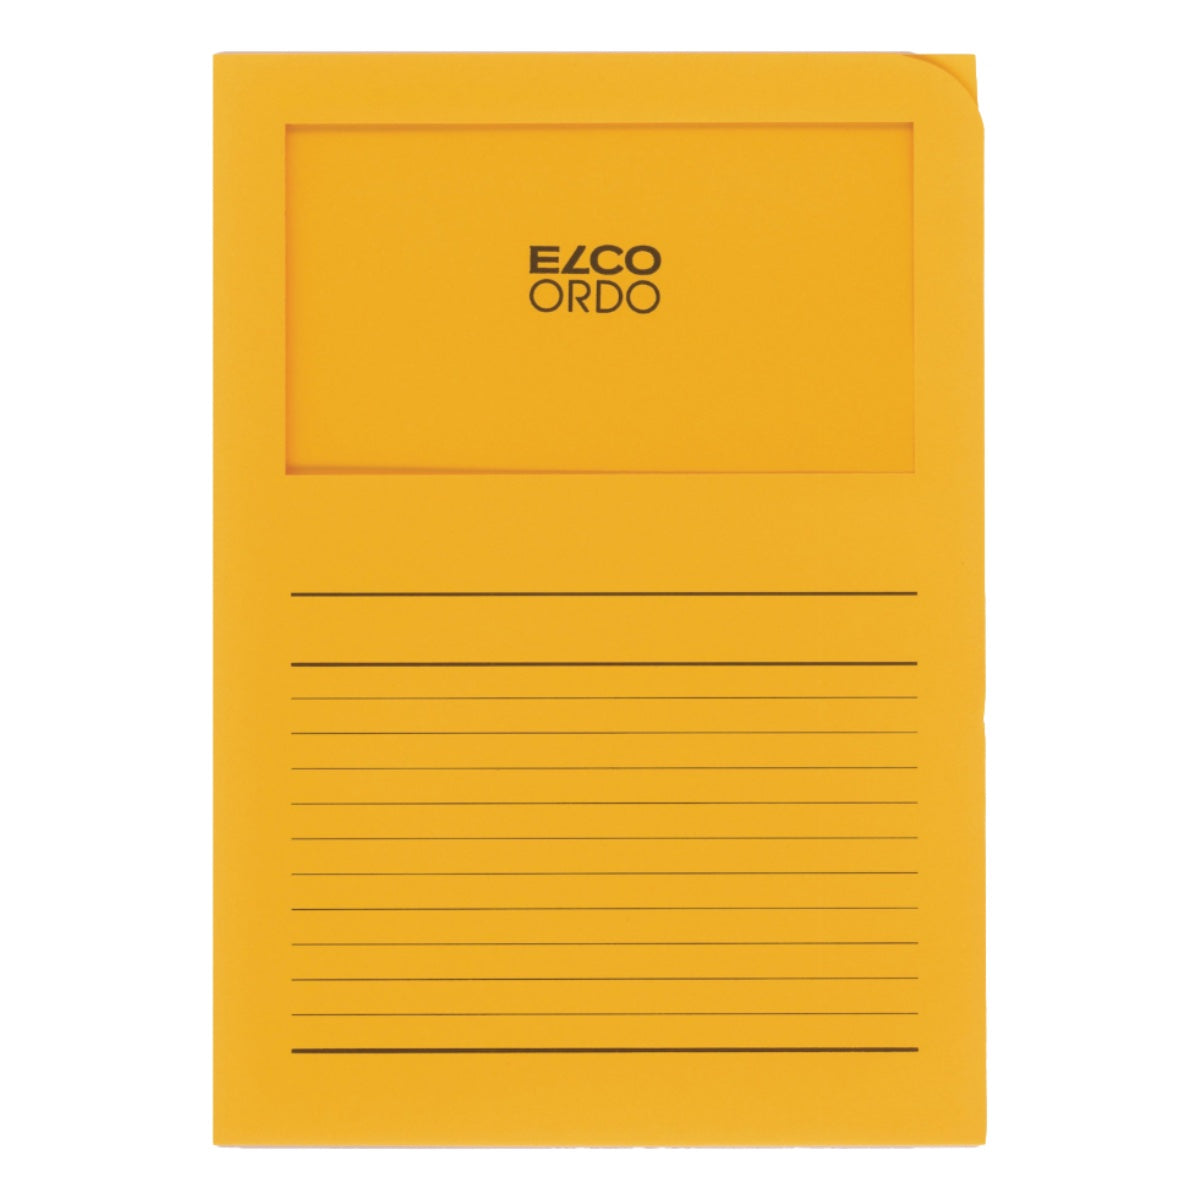 Elco Ordo Classico, L Paper Folder with Window, 5/pack, Yellow